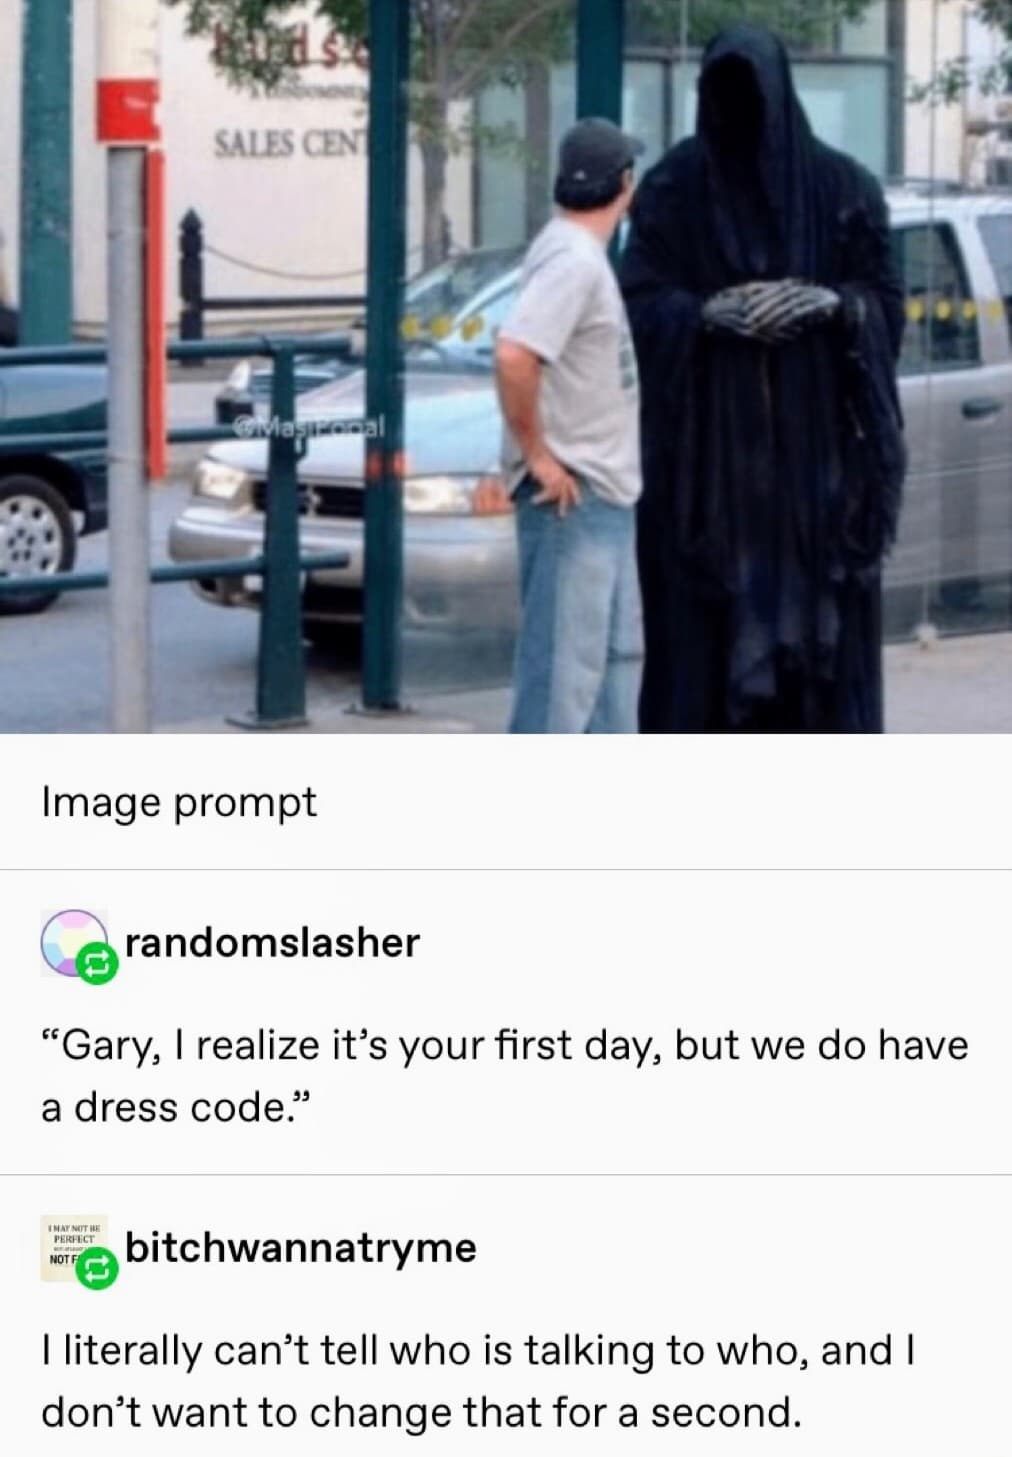 gary i realize it's your first day but we do have a dress code - Sales Cen Cavawal Image prompt Crandomslasher Gary, I realize it's your first day, but we do have a dress code." Inay Neithe hebitchwannatryme I literally can't tell who is talking to who, a